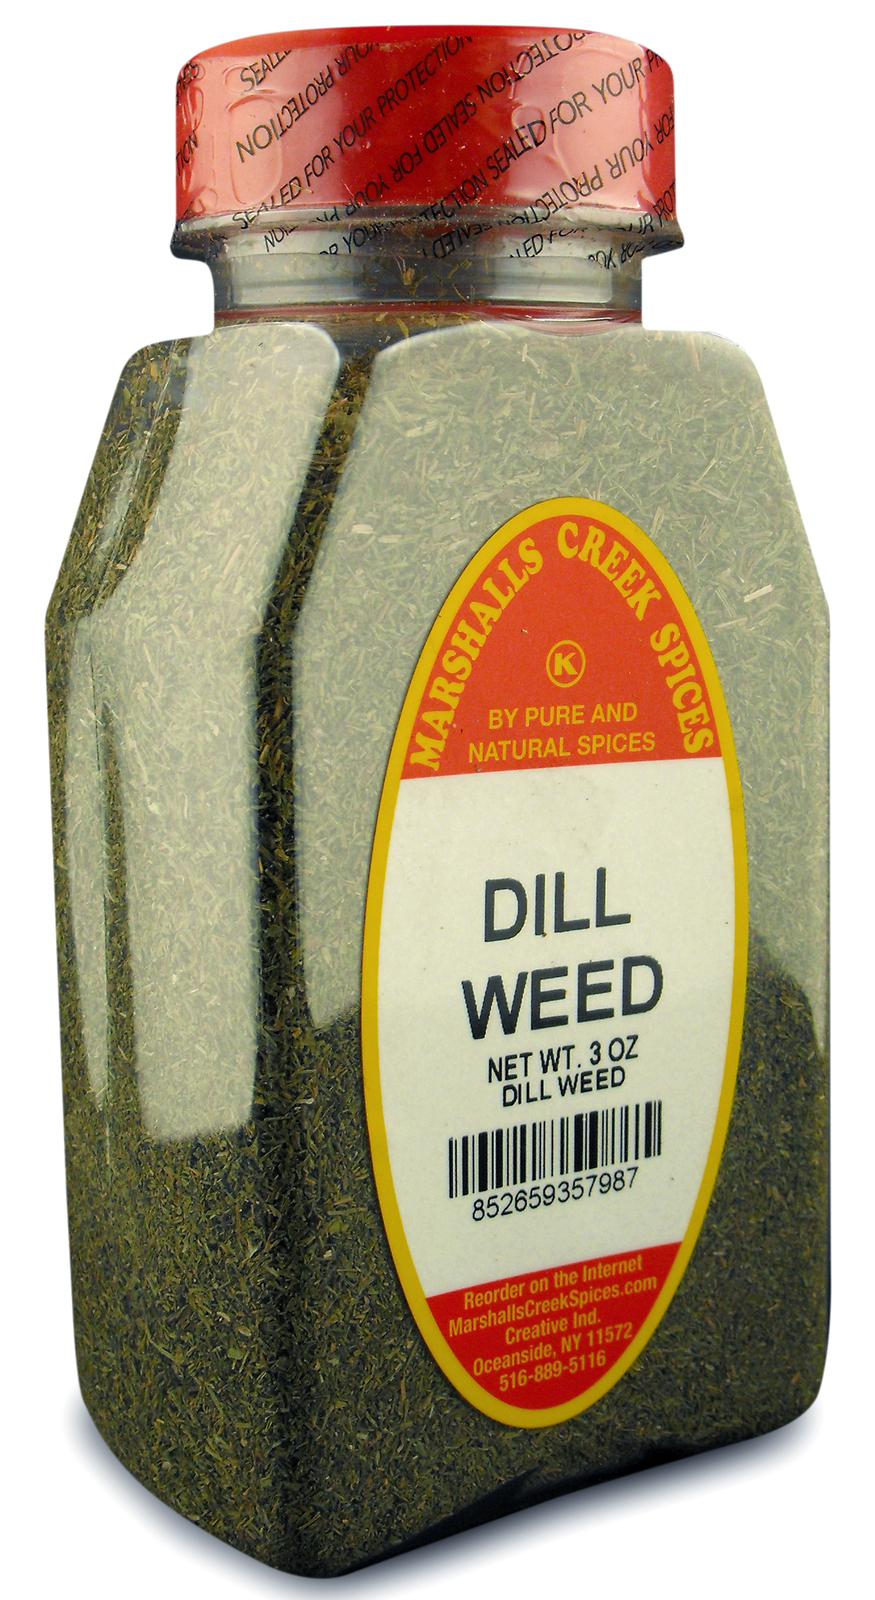 Marshalls Creek Kosher Spices, (st00), DILL WEED